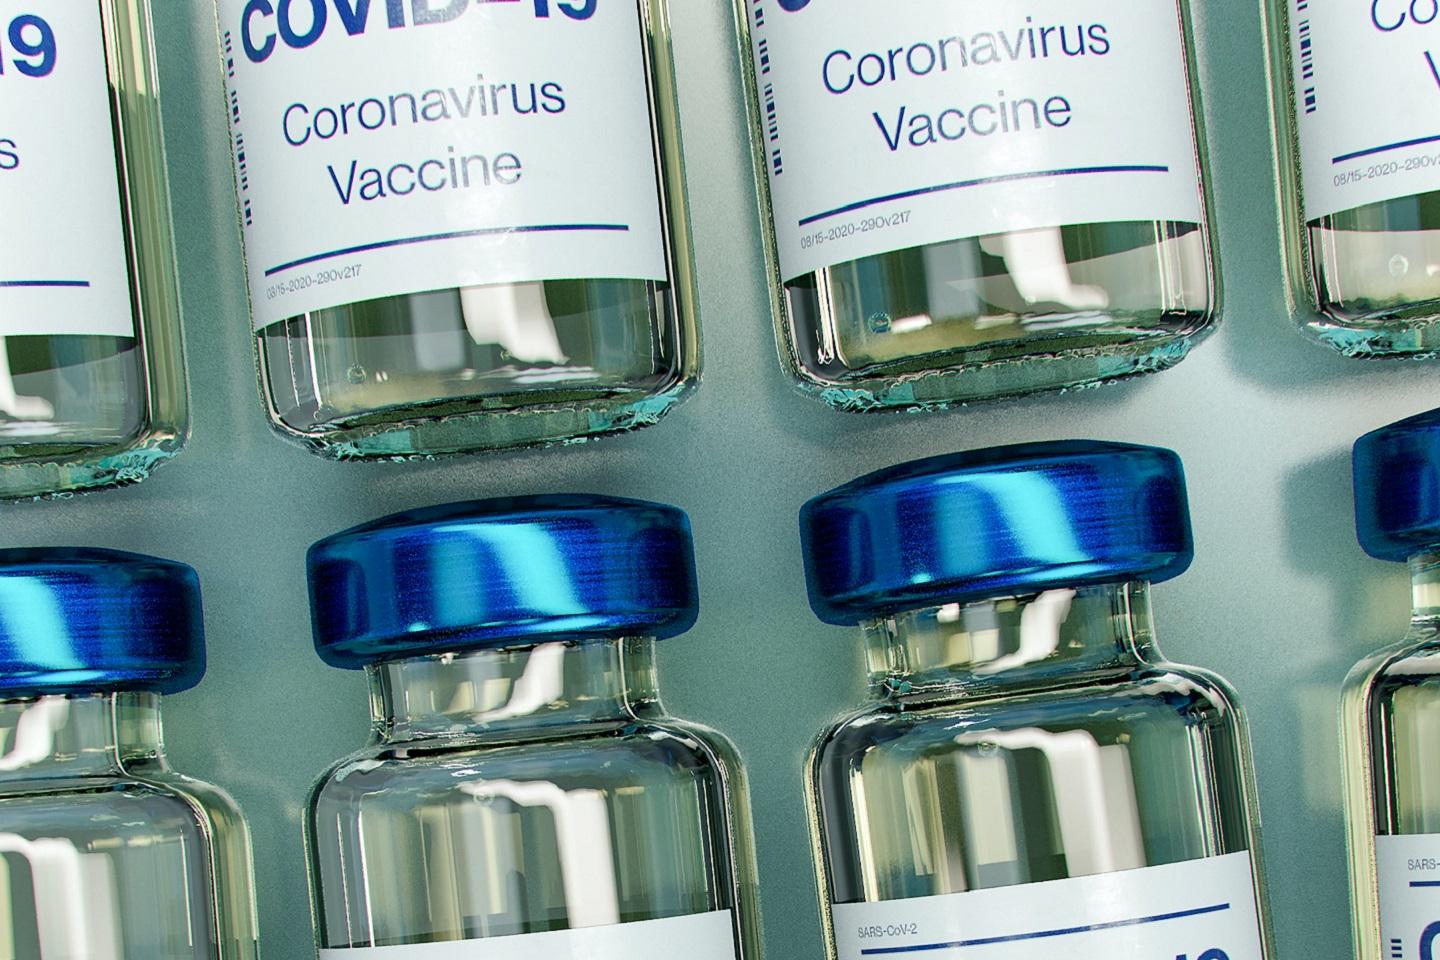 CSL says vaccine manufacture accelerated